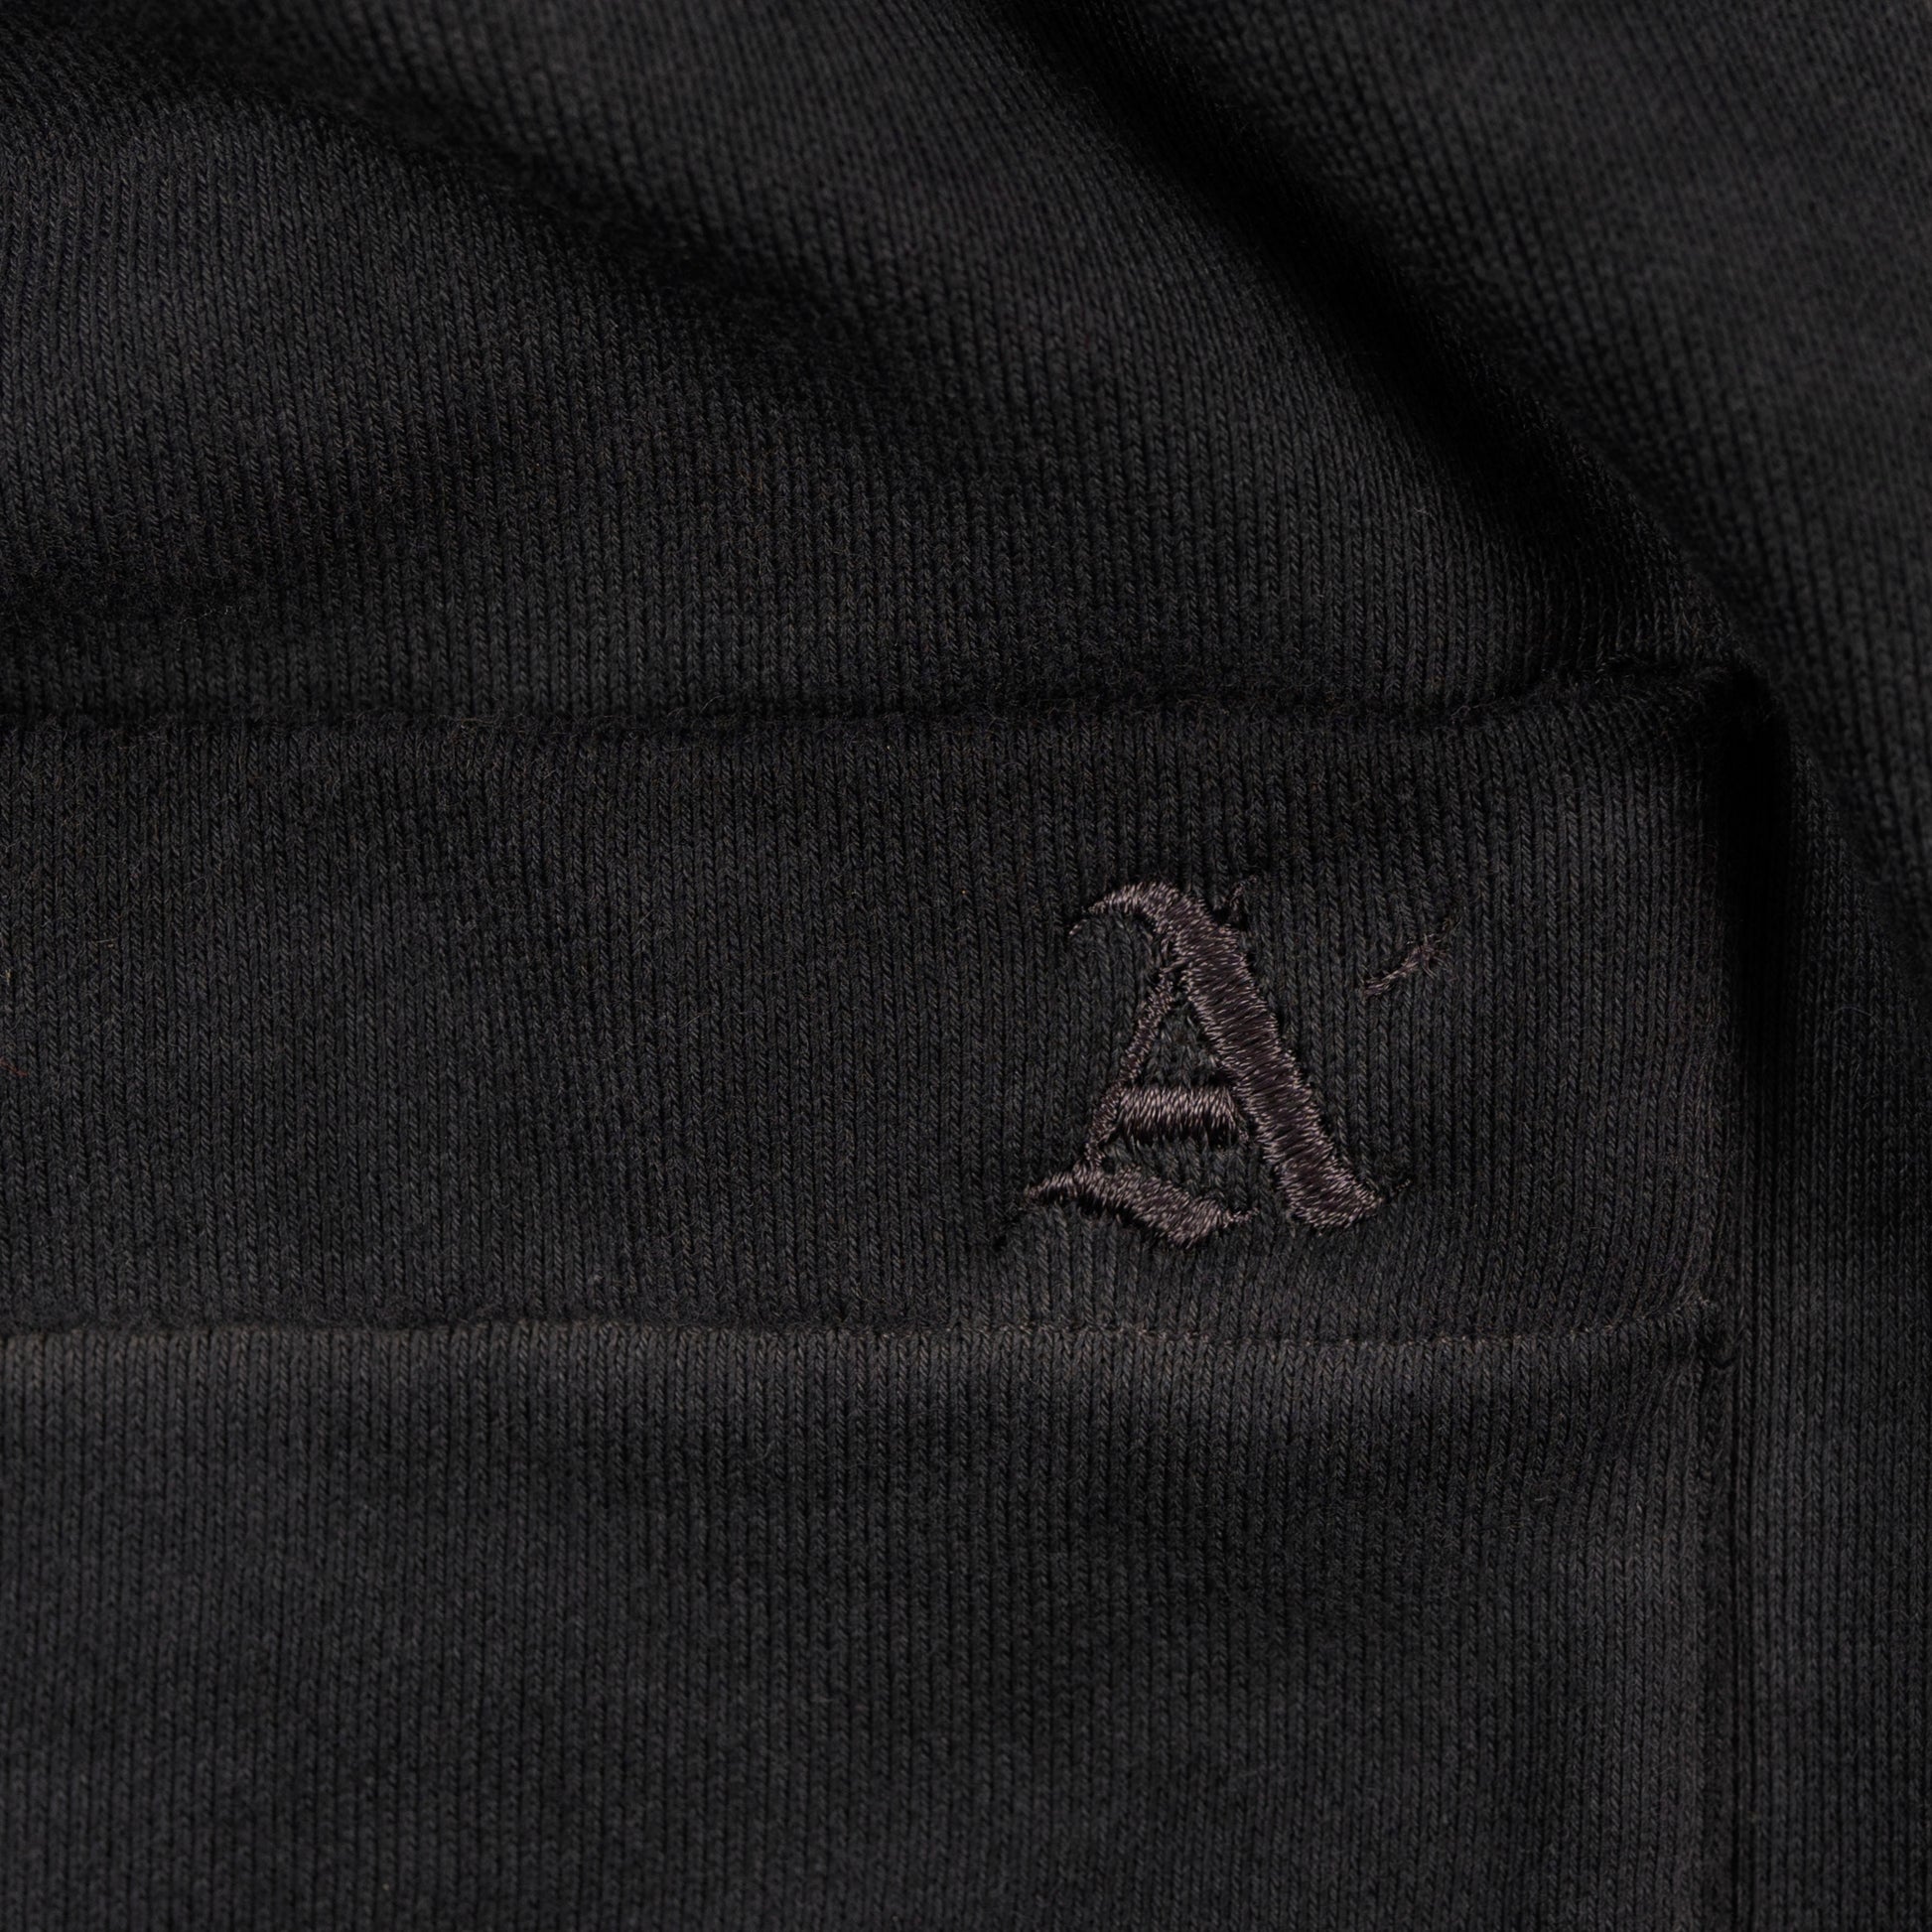 Detail View of Embroidered 'A' on Allora Track Pants by Aseye Studio